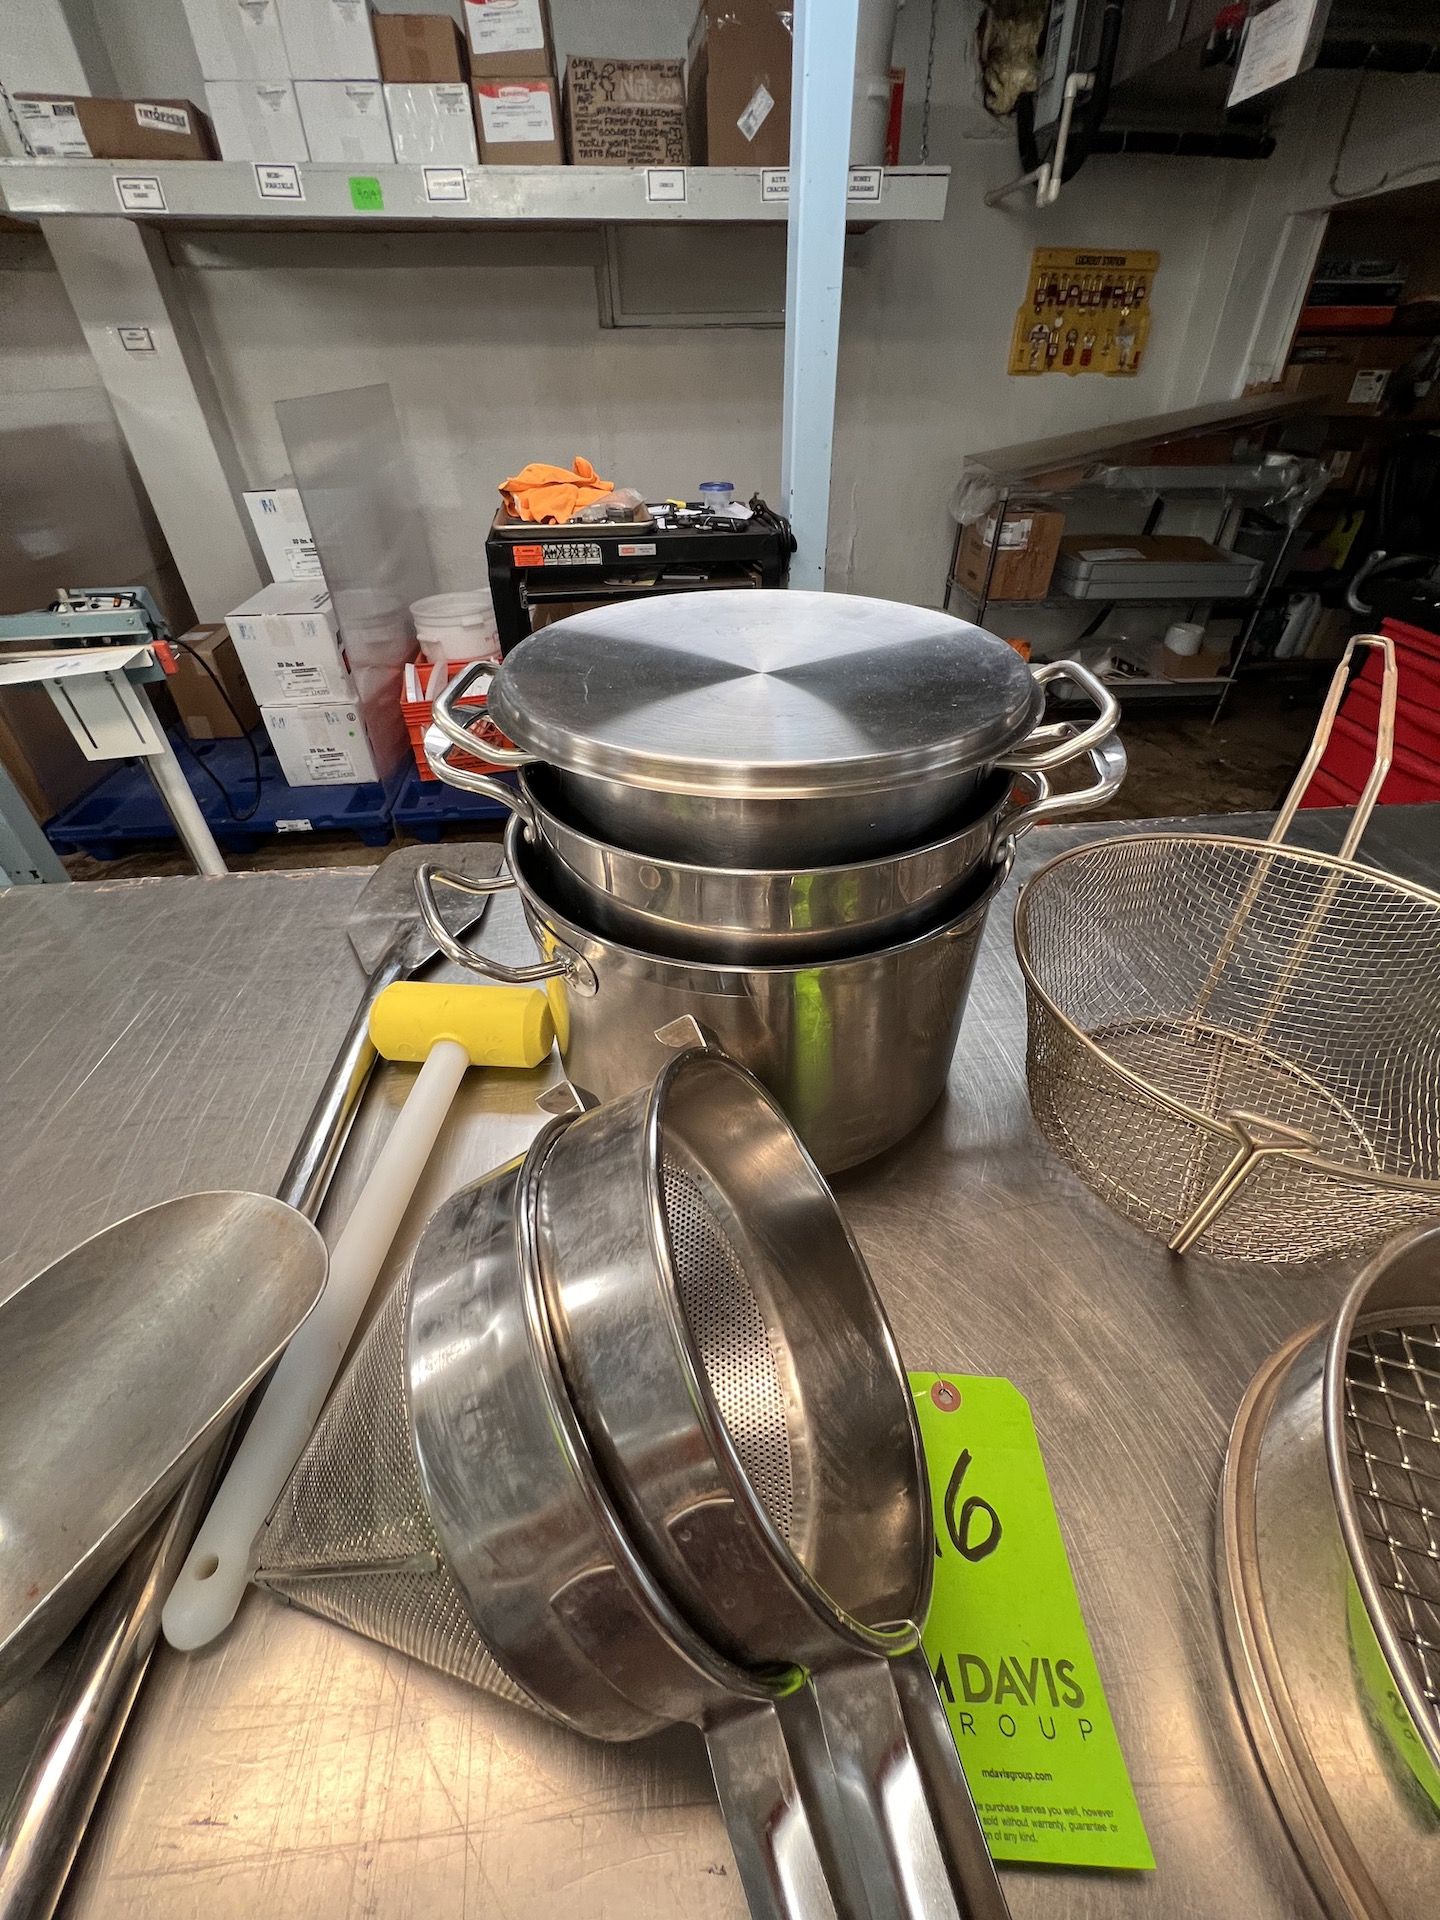 ASSORTED COOKING AND BAKING UTENSILS, S/S SCOOP, S/S PADDLE, S/S SIEVE, S/S FILTERS, POTS, PANS - Image 5 of 5